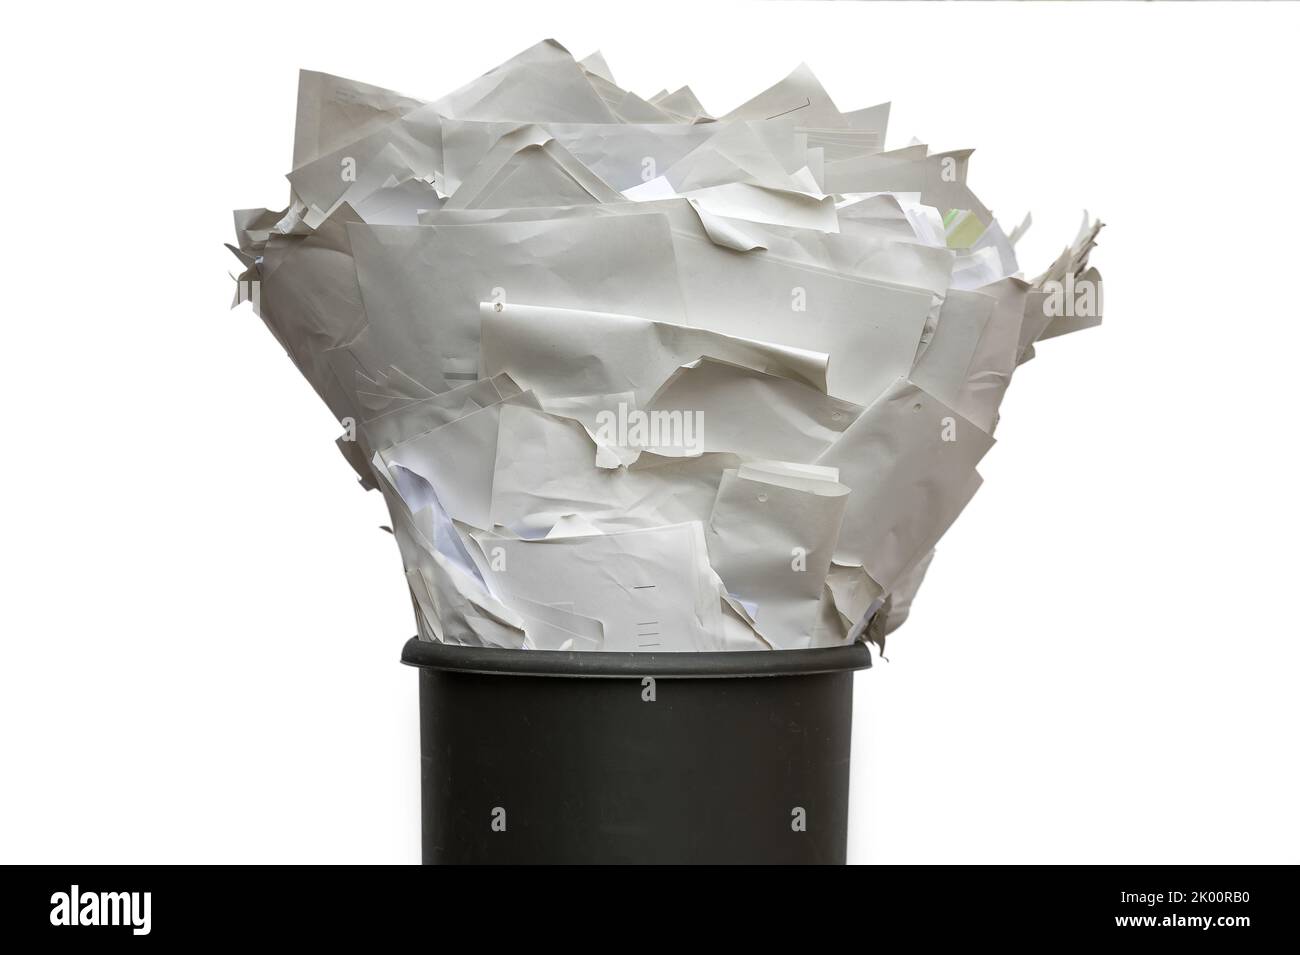 Full trash against a white background as a symbol of paper usage and costs Stock Photo